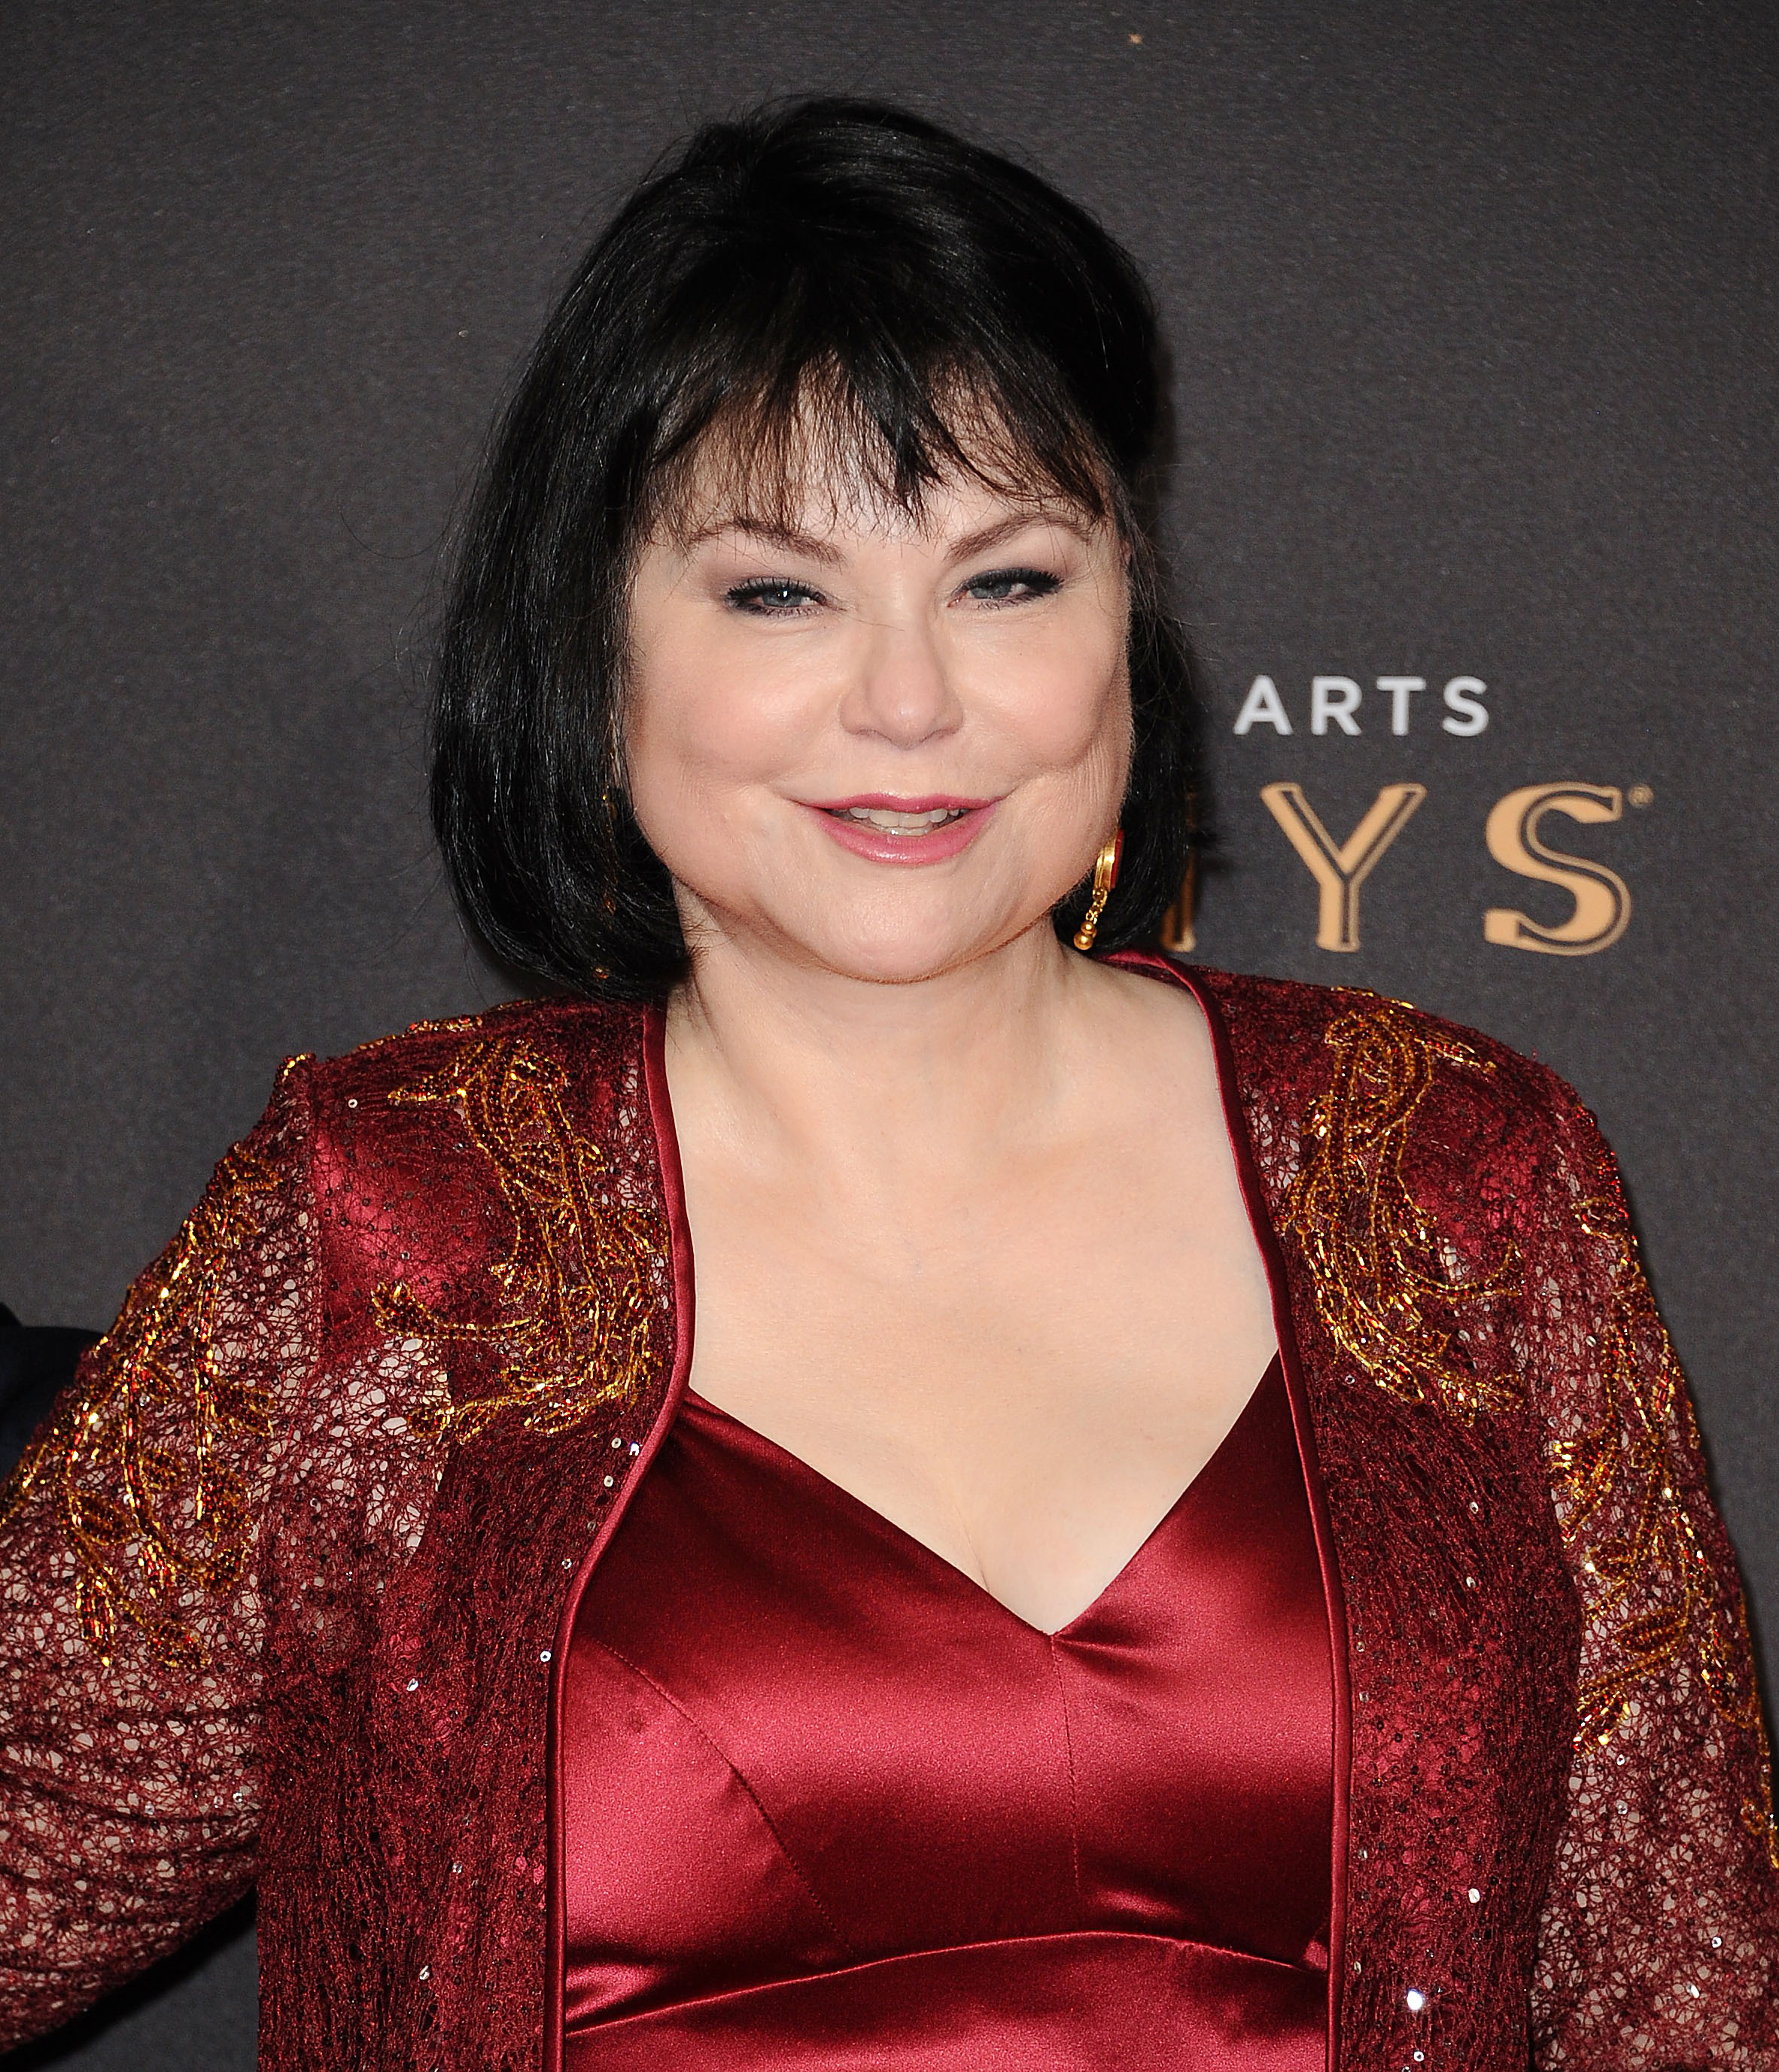 Actress Delta Burke attends the 2017 Creative Arts Emmy Awards at Microsoft Theater on September 10, 2017, in Los Angeles, California. | Source: Getty Images